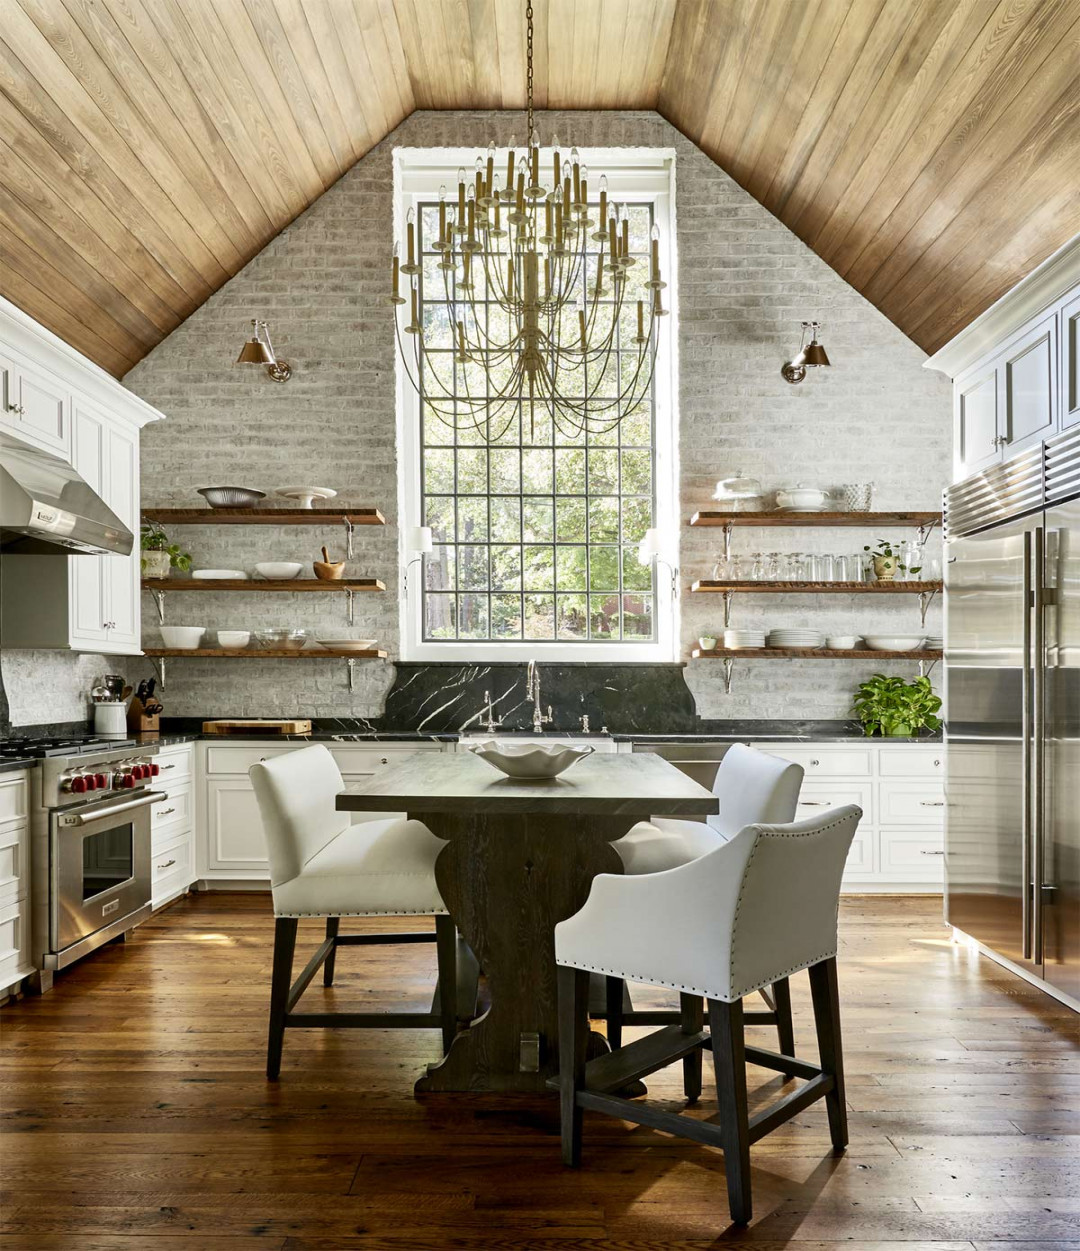 Vaulted Ceilings in the Kitchen: Pros and Cons - Plank and Pillow